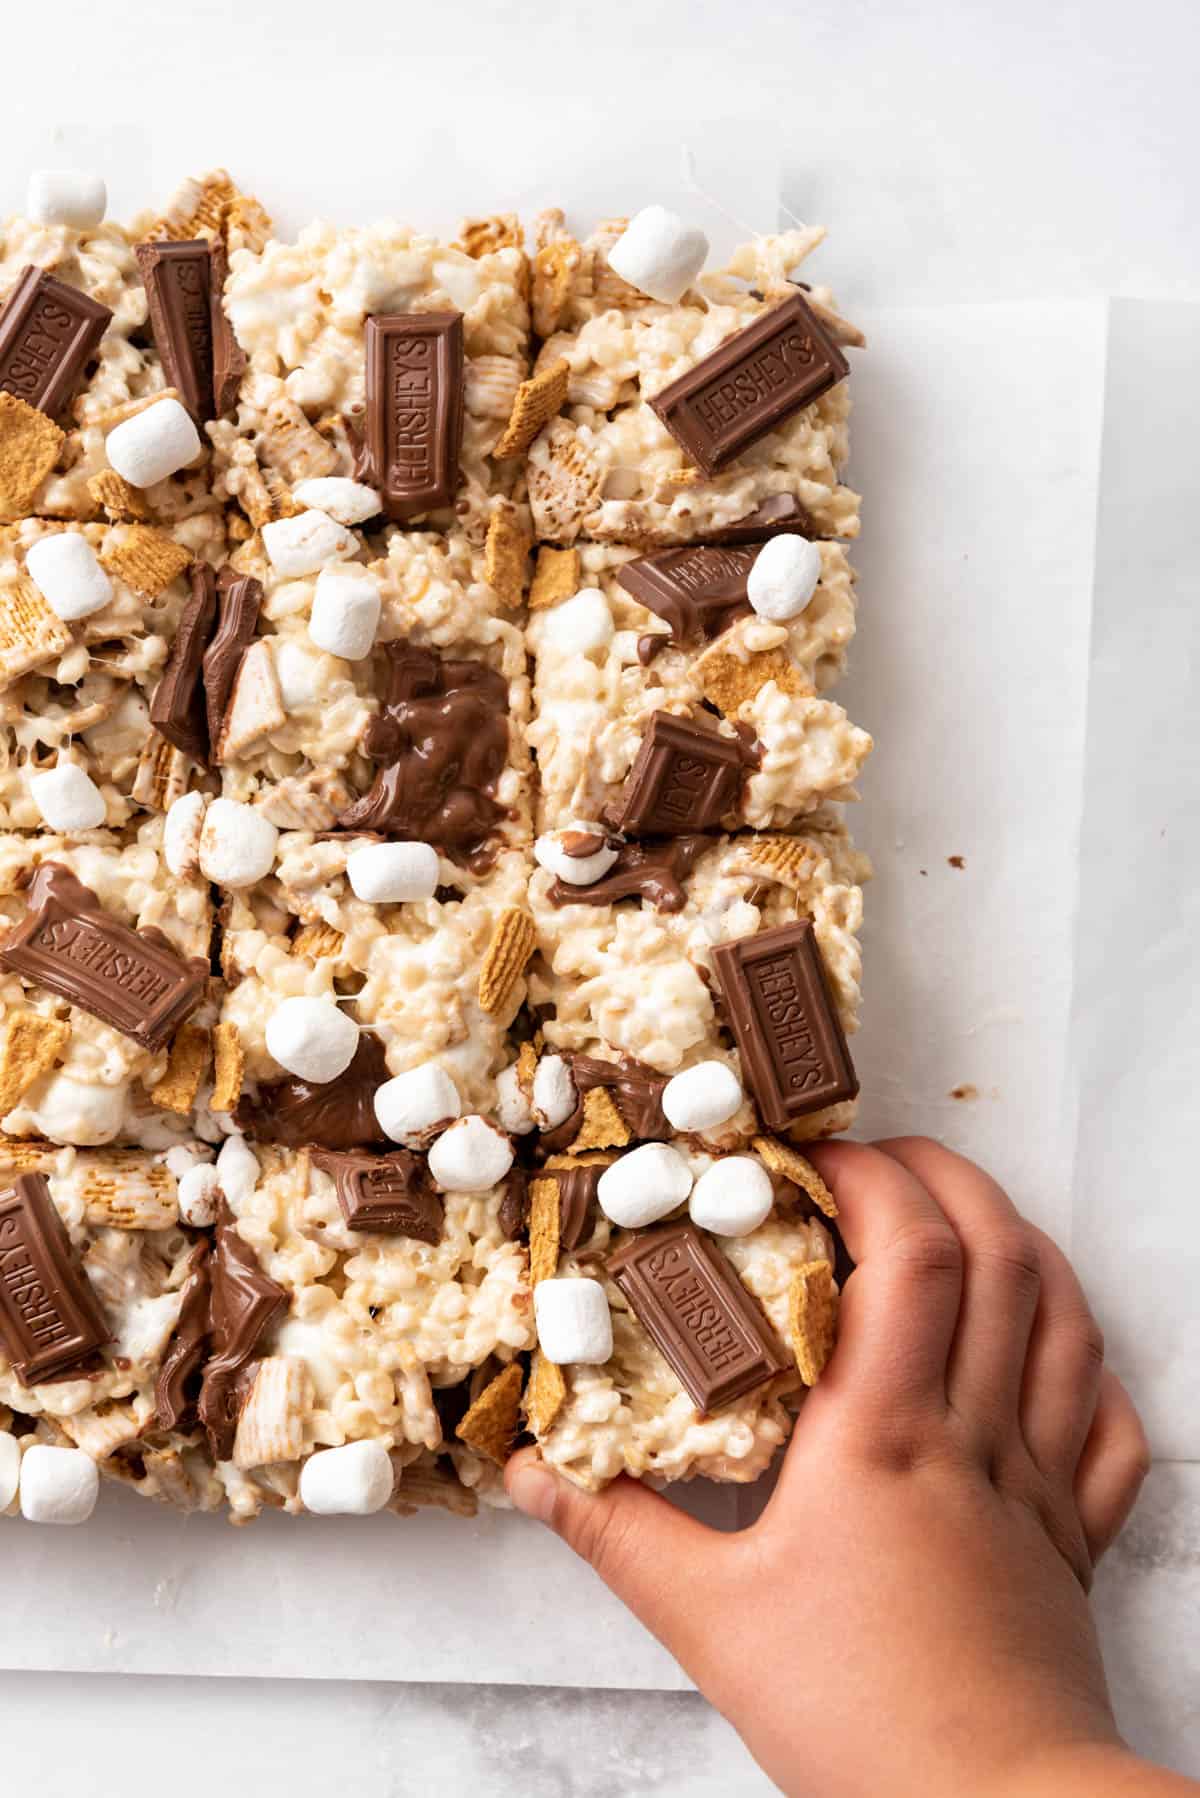 A child's hand pulling a s'mores rice krispie treat away from more cereal squares.